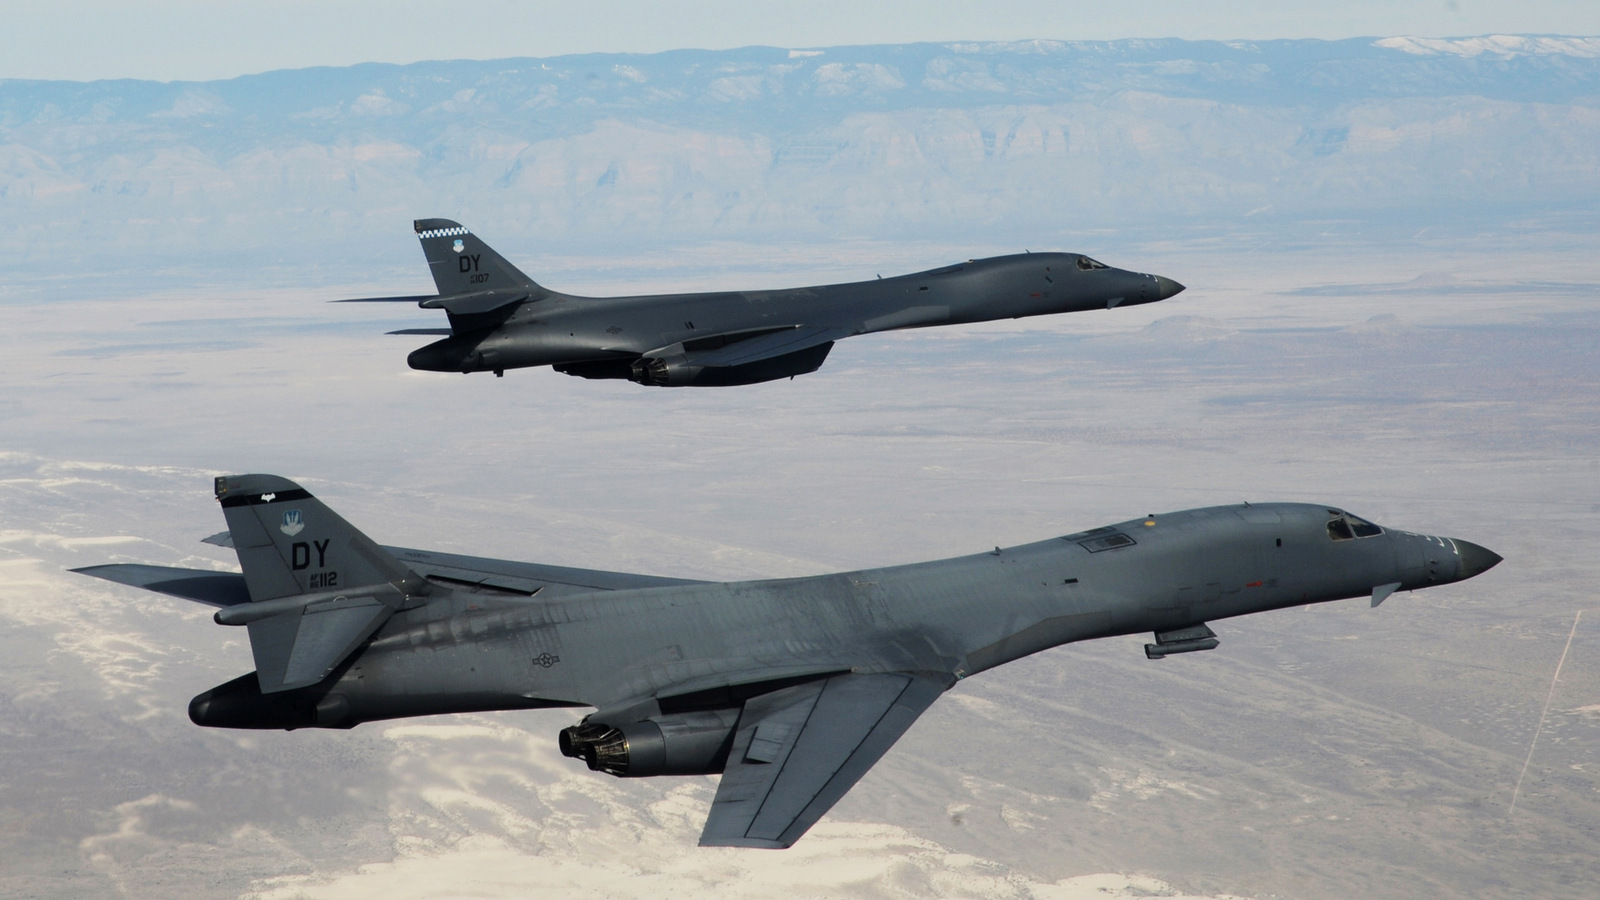 A two-ship of B-1B Lancers assigned to the 28th Bomb Squadron, Dyess Air Force Base, Texas, fly in formation over New Mexico during a training mission Feb. 24, 2010. (Photo: U.S. Air Force/Kevin J. Gruenwald)